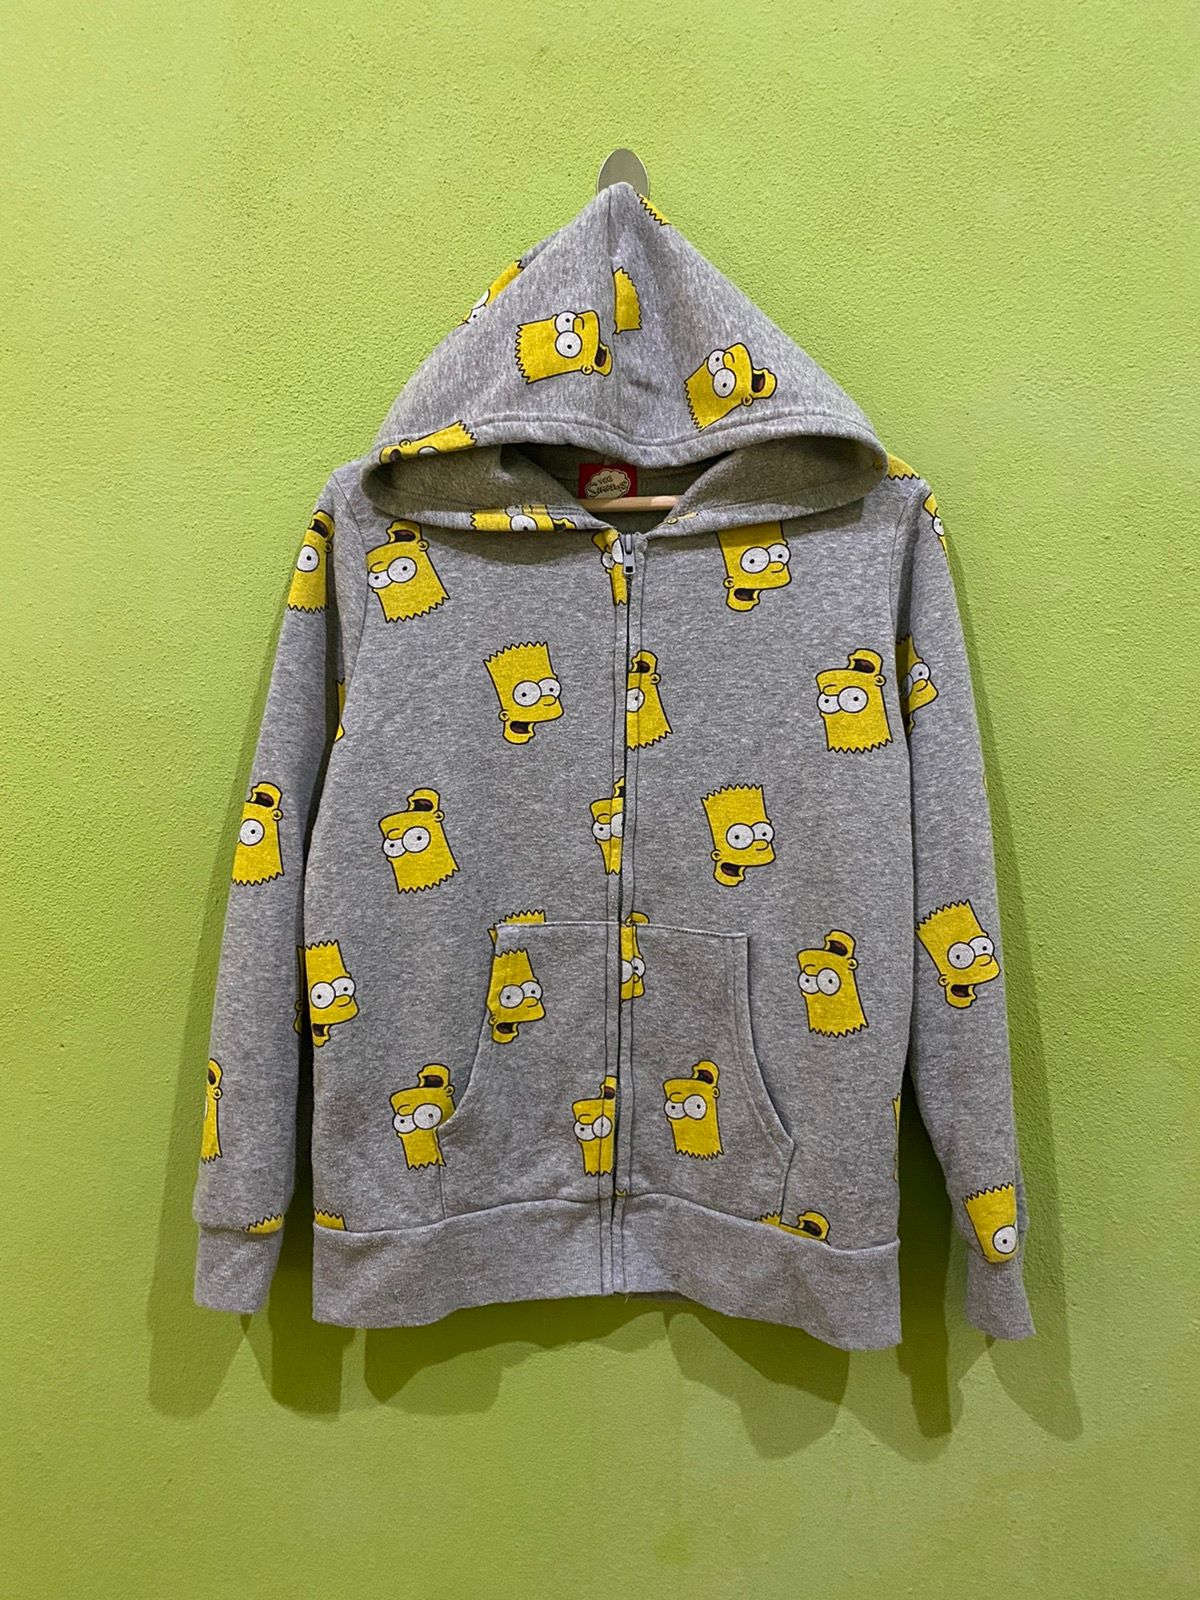 The Simpsons The Simpsons Full Print Hoddies Sweater Size US M / EU 48-50 / 2 - 1 Preview